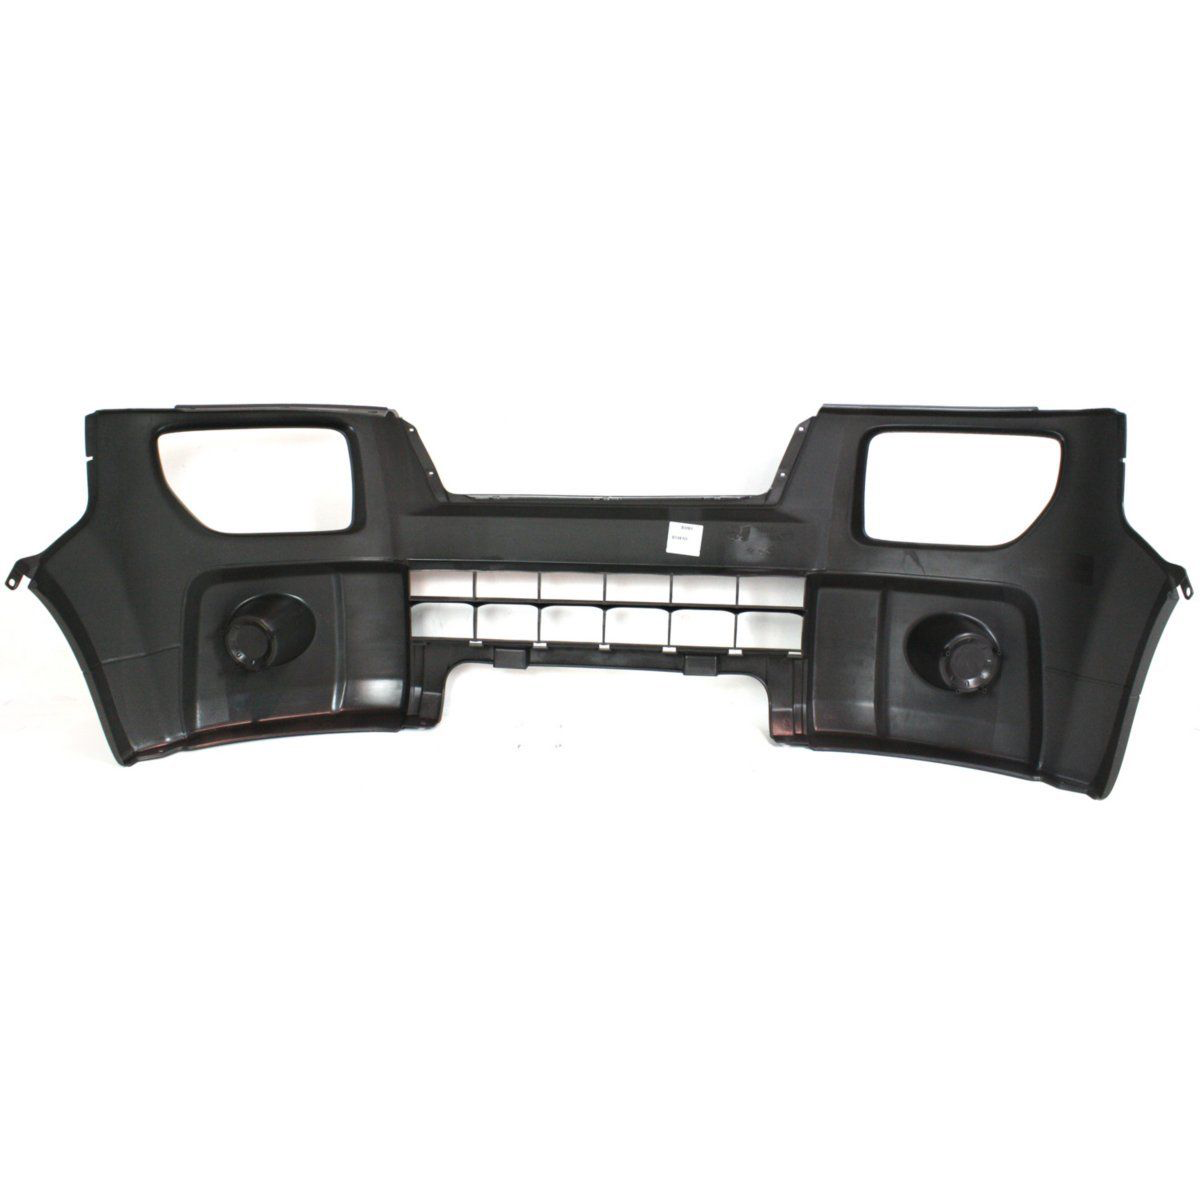 2003-2005 HONDA ELEMENT Front Bumper Cover EX Painted to Match